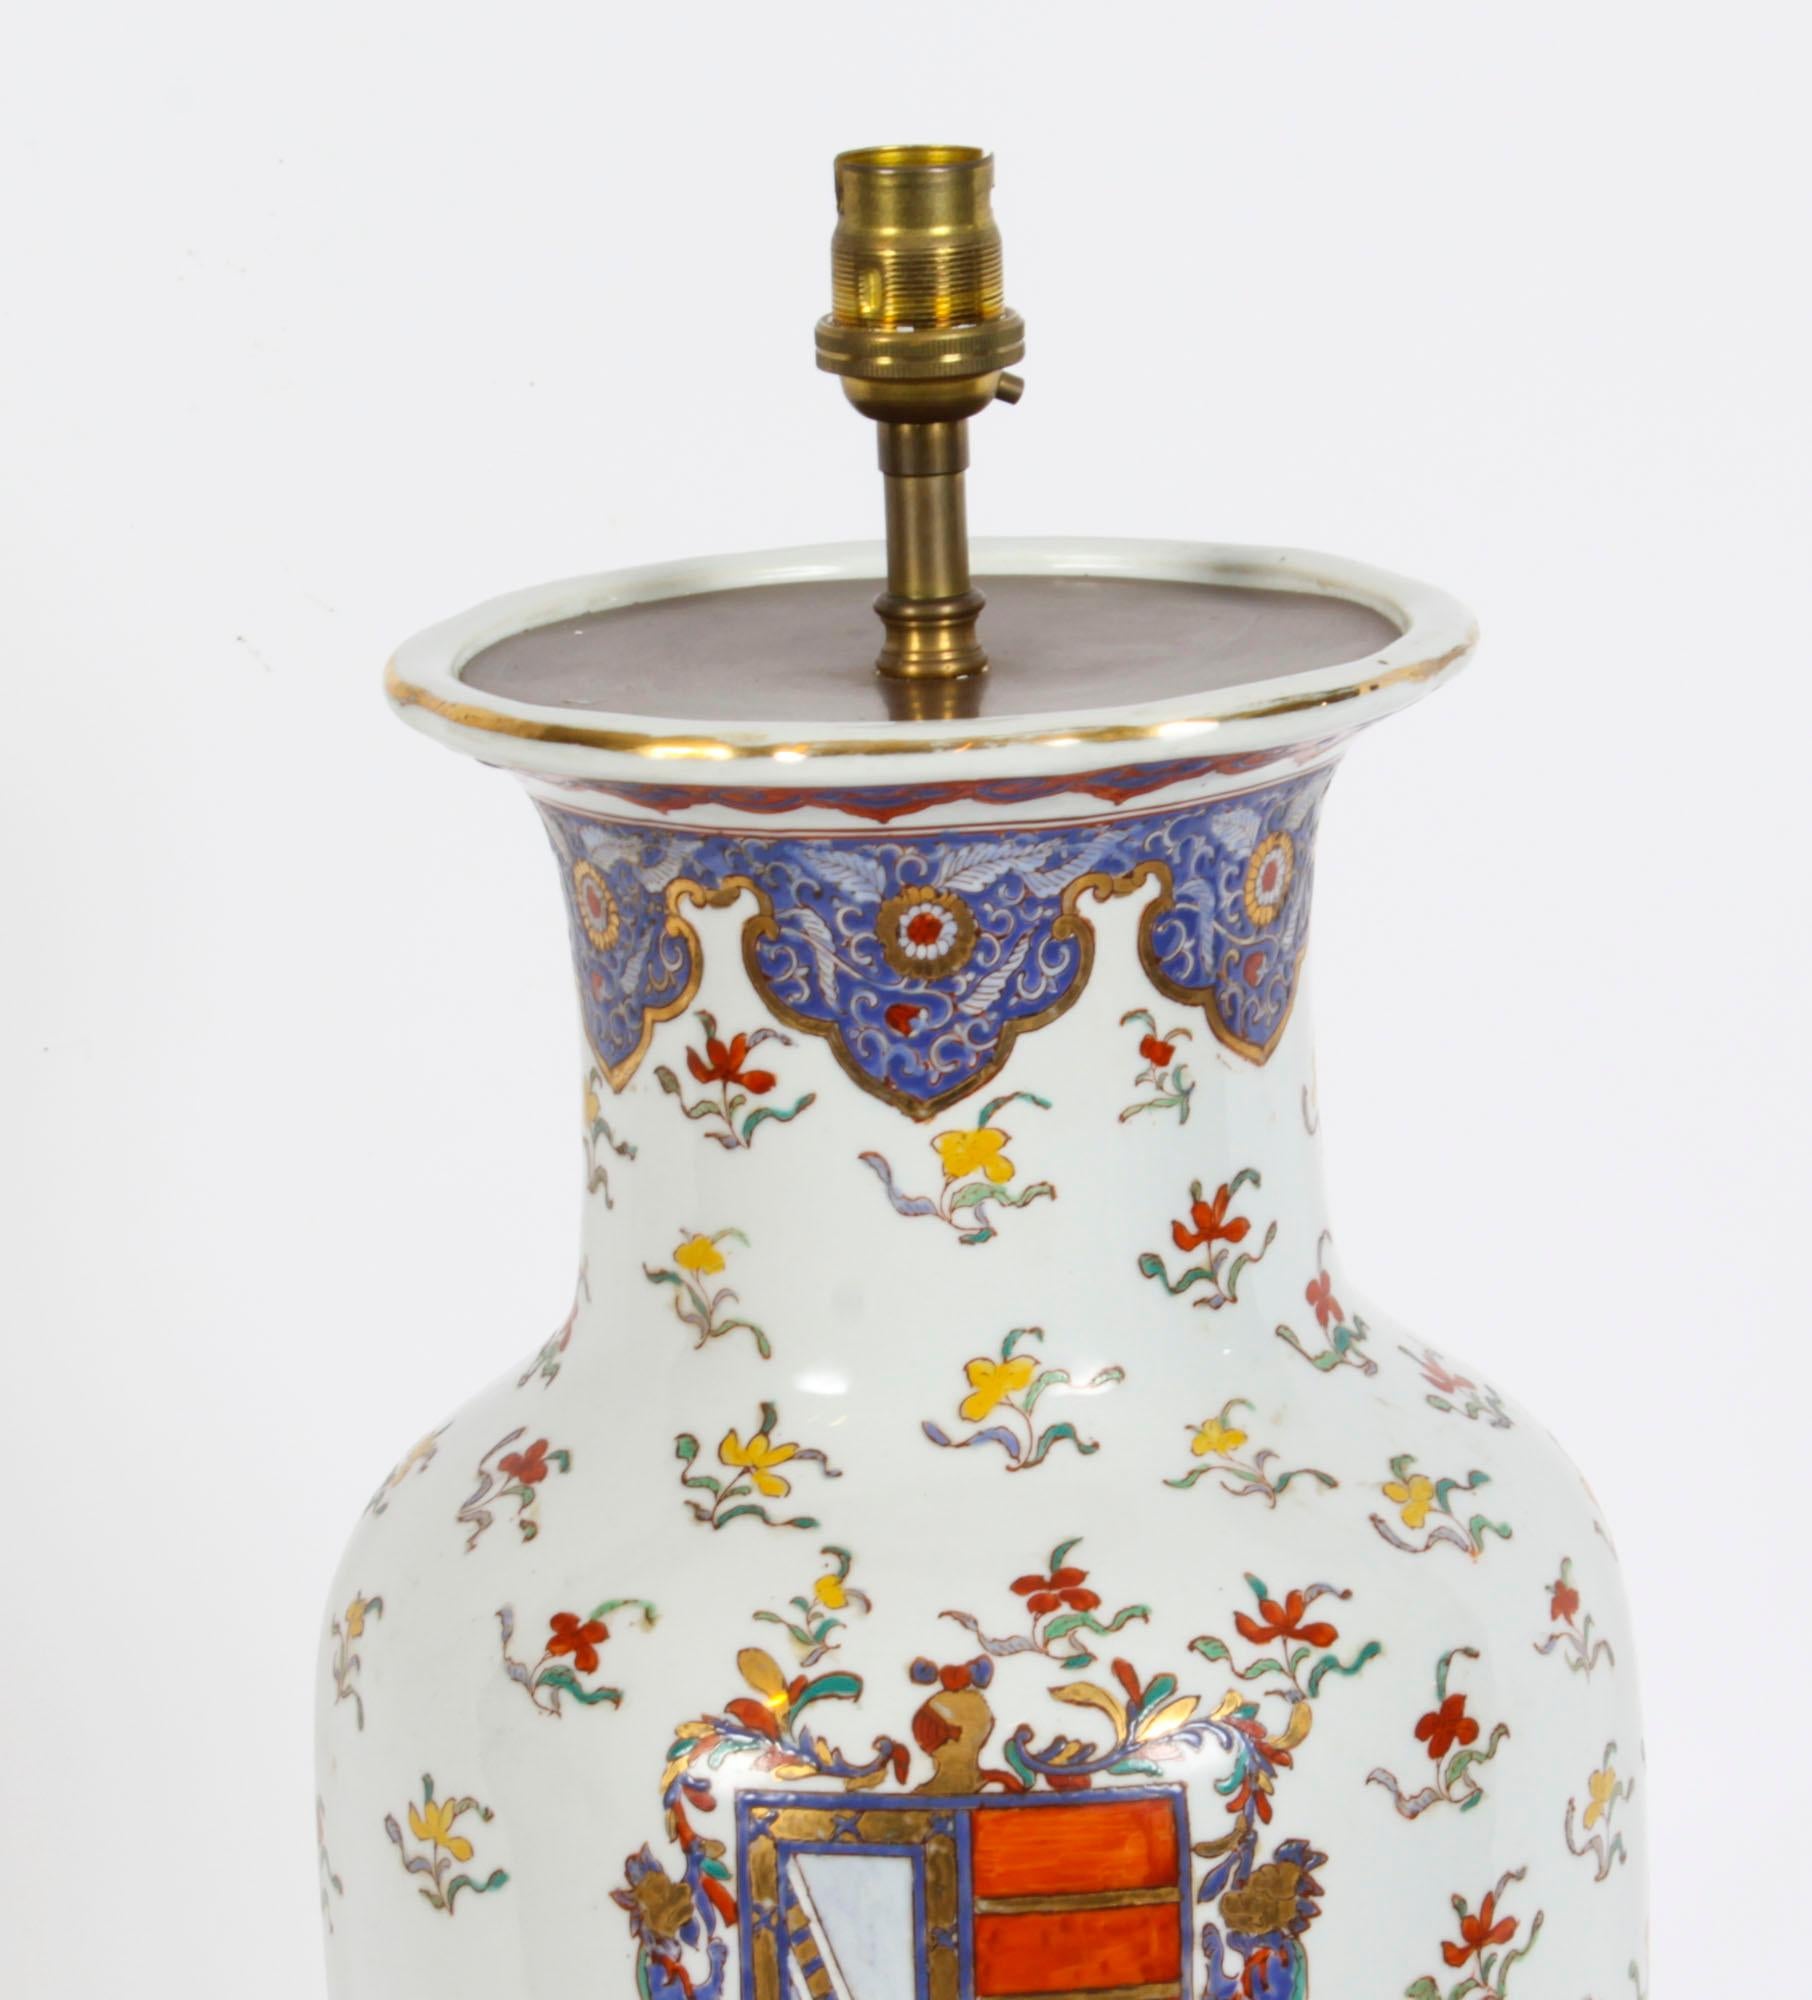 A beautiful large French Samson porcelain lamp with hand painted scenes and delicate gilt decoration, dating from C 1880. 
 
The baluster shaped lamp features hand painted armorial decoration in the Chinese Export taste, now mounted as a lamp on a